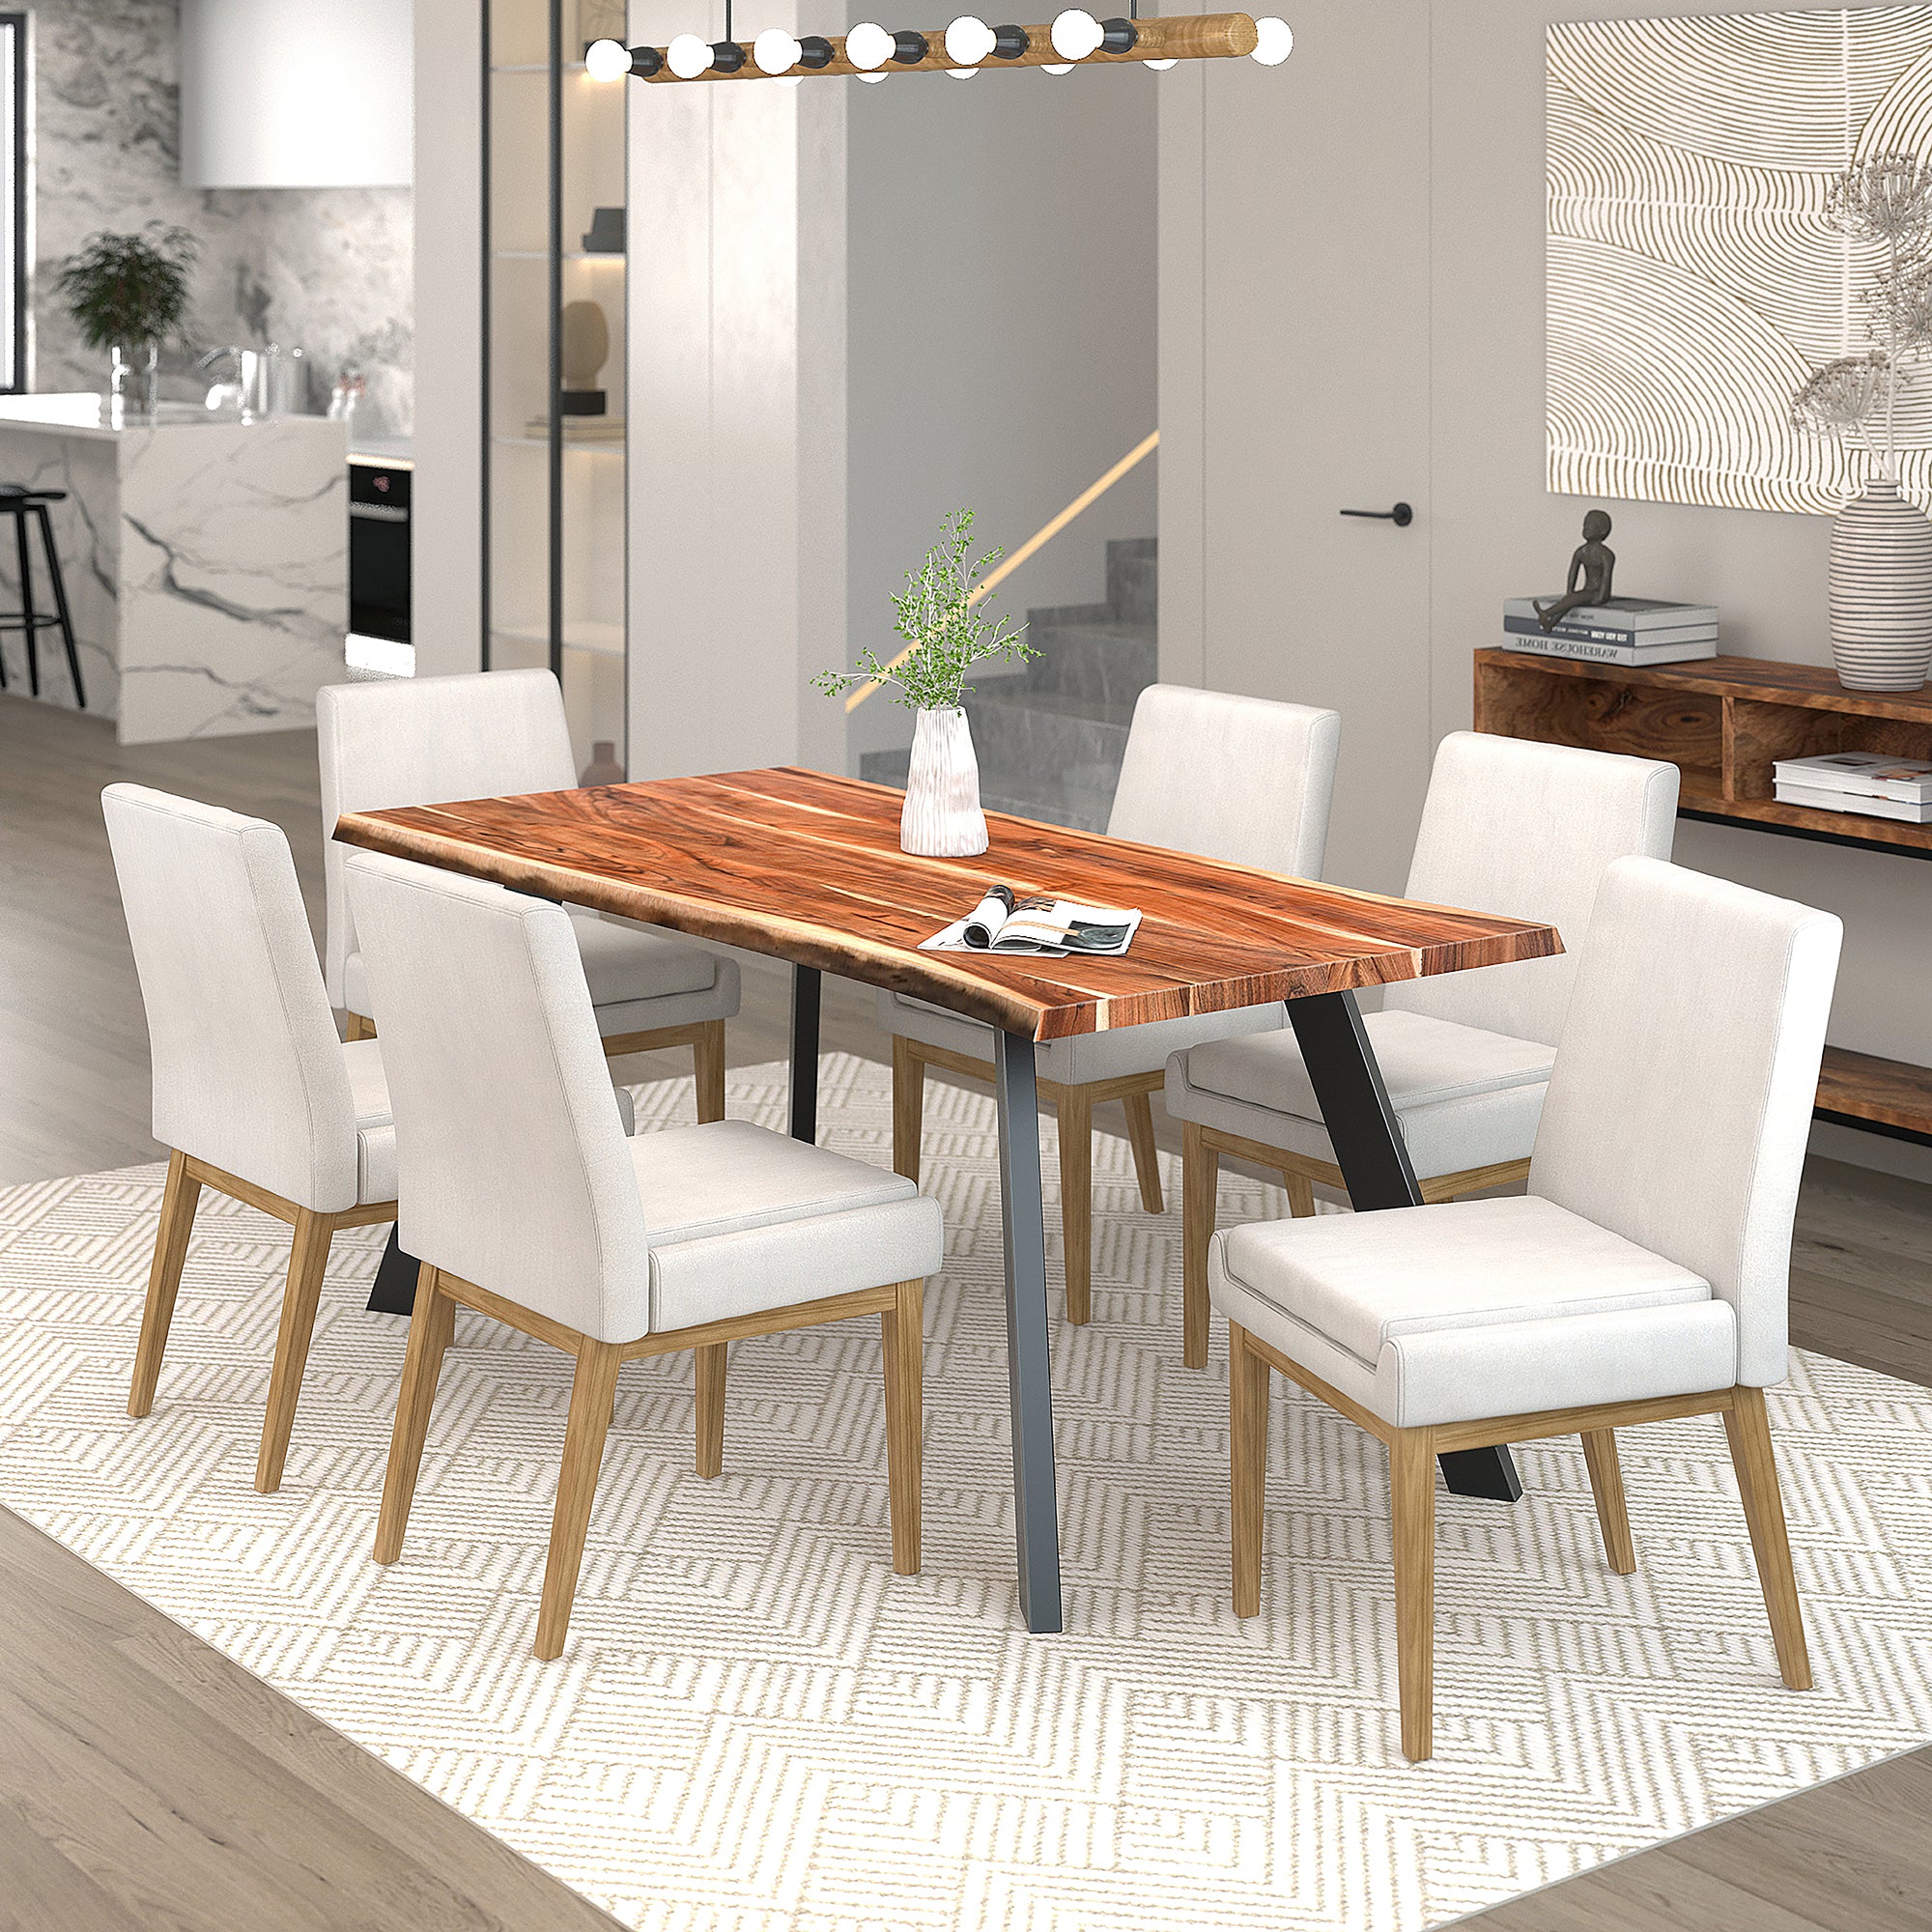 Wauseon/Bradlie Solid Wood/Iron/Fabric/Metal 7Pc Dining Set - Natural Table/Beige Chair